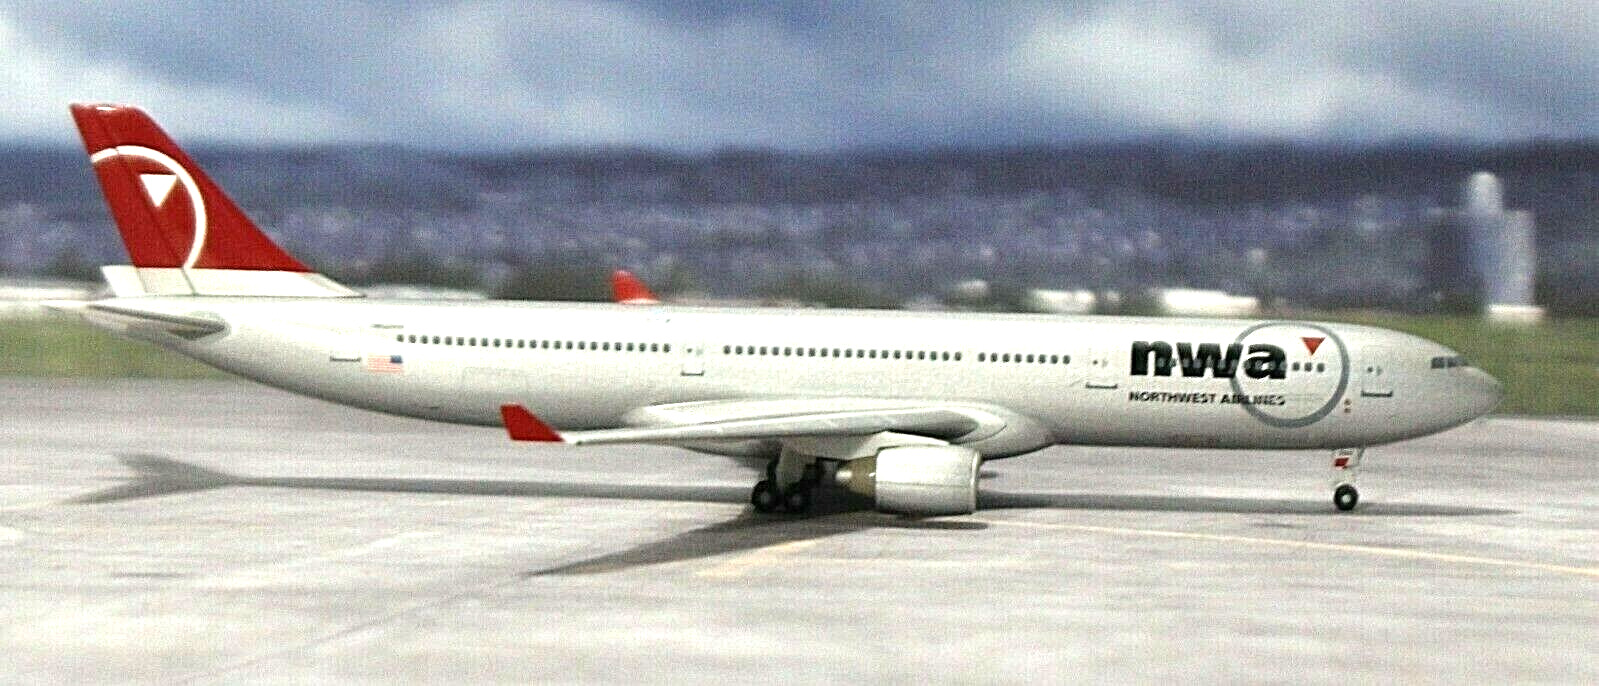 Herpa Models  Airbus A330 323  Northwest Airlines 1:400 Scale